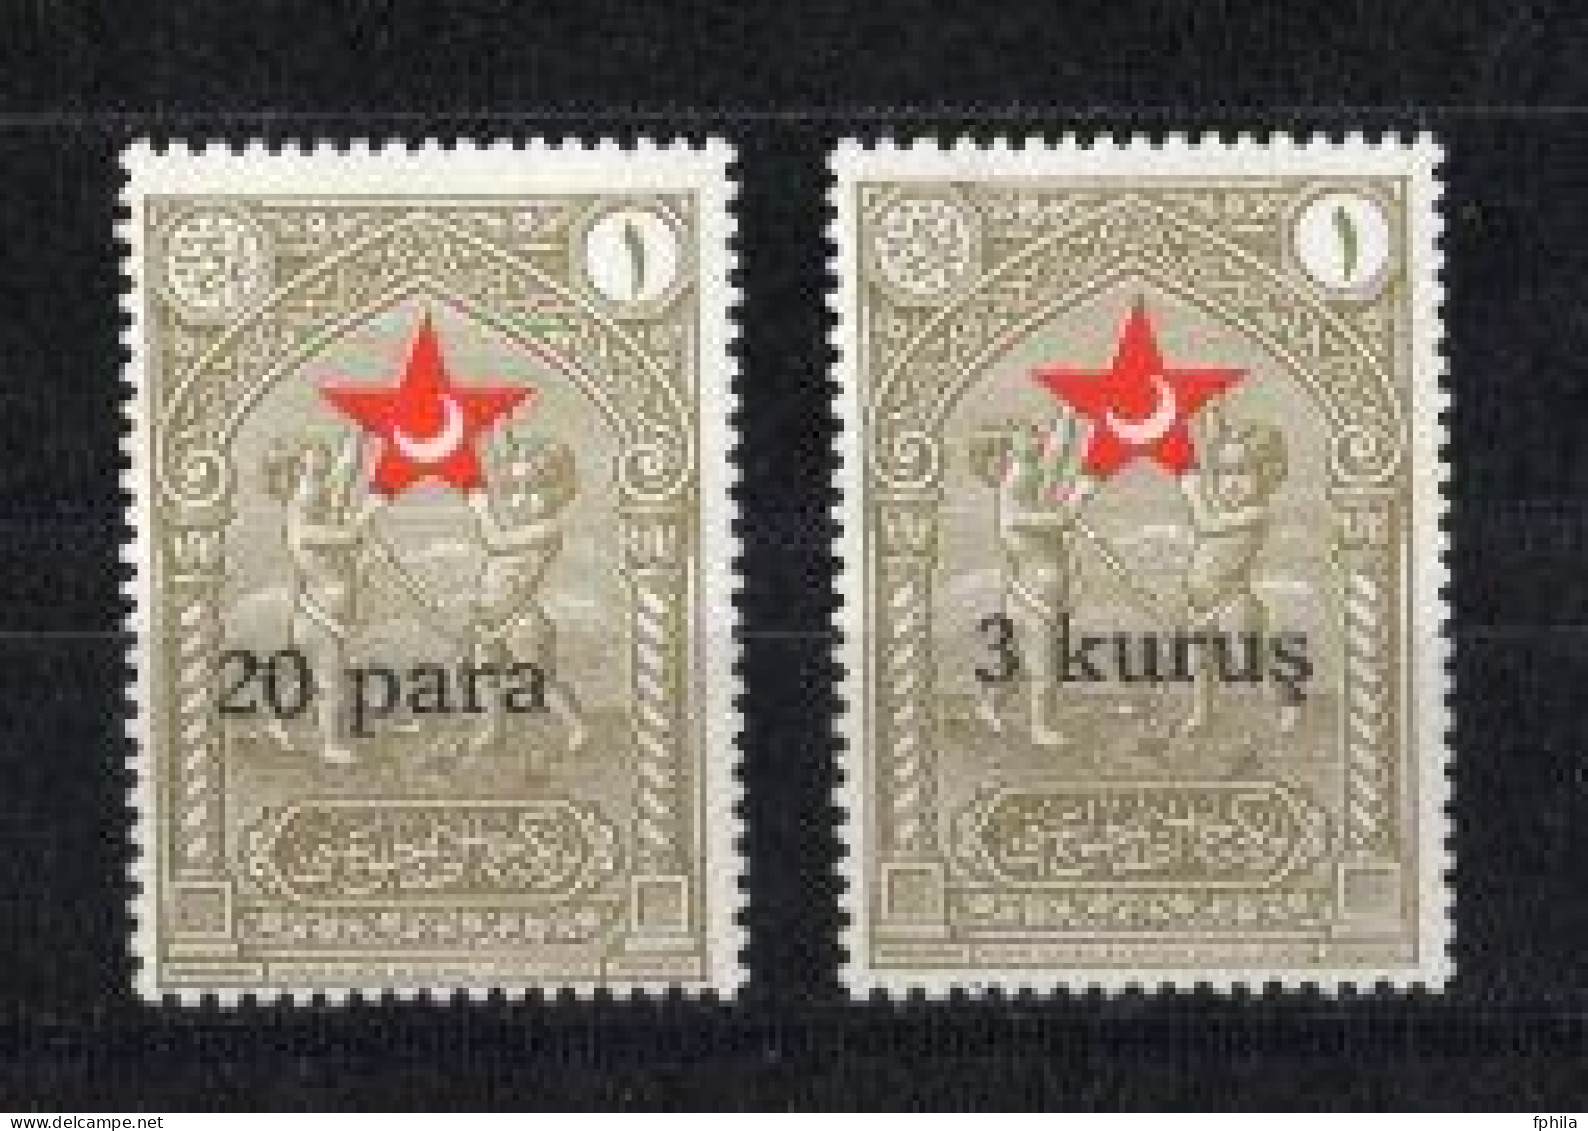 1932 TURKEY STAMPS IN AID OF THE TURKISH SOCIETY FOR THE PROTECTION OF CHILDREN SURCHARGED WITH LARGE LETTERS NO GUM - Charity Stamps